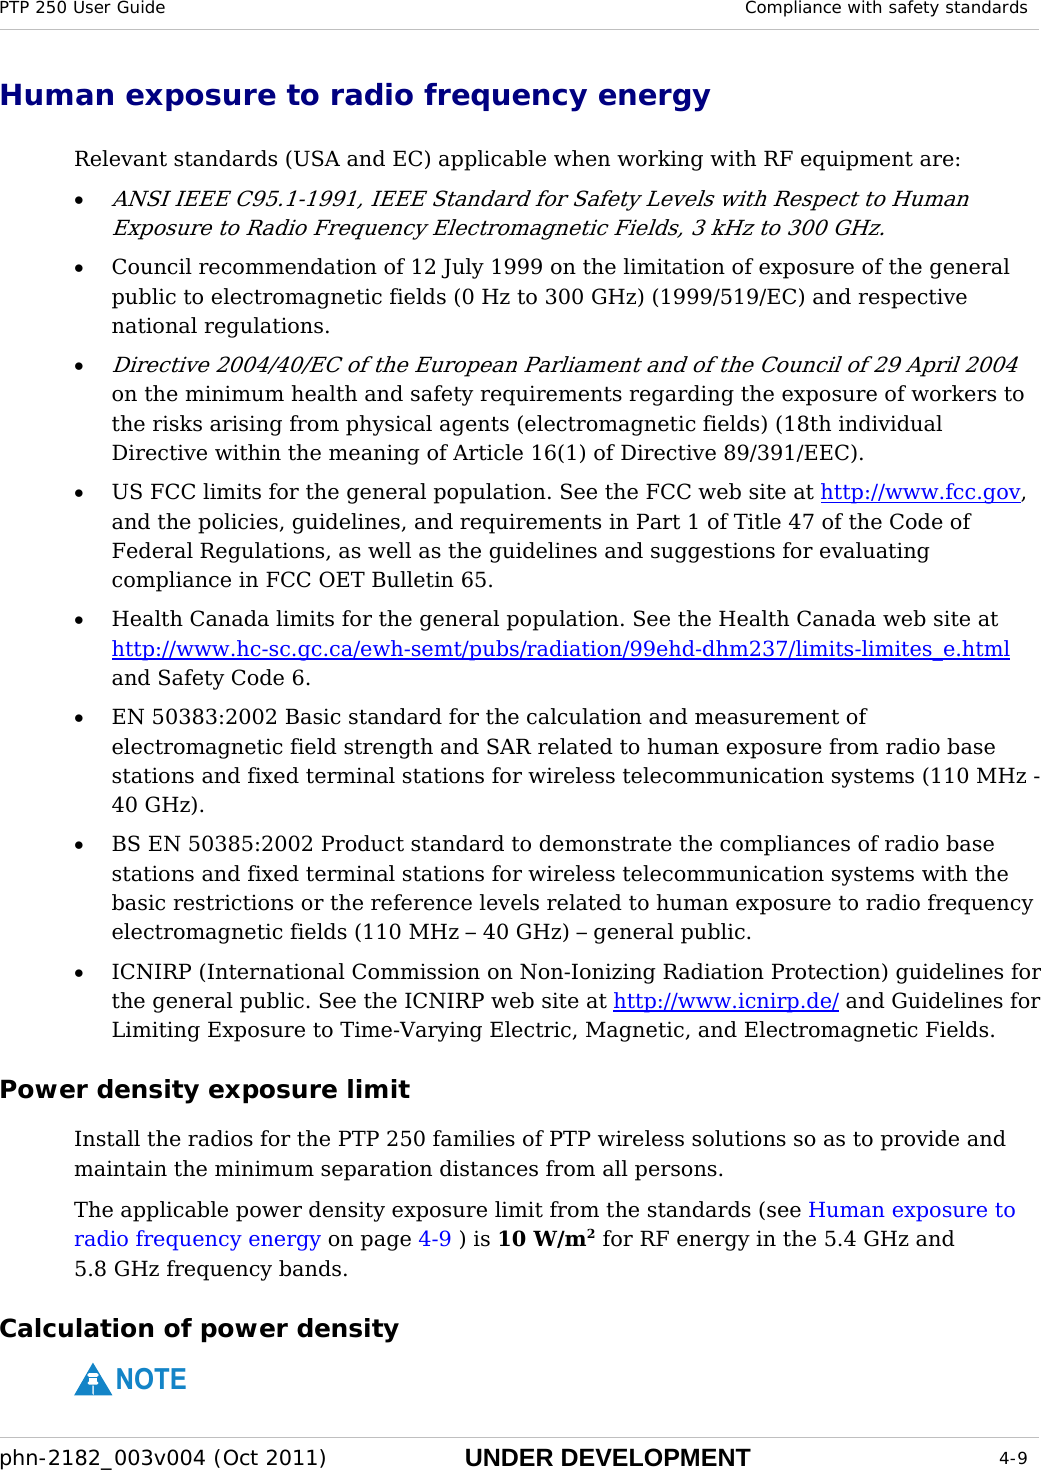 PTP 250 User Guide  Compliance with safety standards  phn-2182_003v004 (Oct 2011)  UNDER DEVELOPMENT  4-9  Human exposure to radio frequency energy Relevant standards (USA and EC) applicable when working with RF equipment are: • ANSI IEEE C95.1-1991, IEEE Standard for Safety Levels with Respect to Human Exposure to Radio Frequency Electromagnetic Fields, 3 kHz to 300 GHz. • Council recommendation of 12 July 1999 on the limitation of exposure of the general public to electromagnetic fields (0 Hz to 300 GHz) (1999/519/EC) and respective national regulations. • Directive 2004/40/EC of the European Parliament and of the Council of 29 April 2004 on the minimum health and safety requirements regarding the exposure of workers to the risks arising from physical agents (electromagnetic fields) (18th individual Directive within the meaning of Article 16(1) of Directive 89/391/EEC). • US FCC limits for the general population. See the FCC web site at http://www.fcc.gov, and the policies, guidelines, and requirements in Part 1 of Title 47 of the Code of Federal Regulations, as well as the guidelines and suggestions for evaluating compliance in FCC OET Bulletin 65.  • Health Canada limits for the general population. See the Health Canada web site at http://www.hc-sc.gc.ca/ewh-semt/pubs/radiation/99ehd-dhm237/limits-limites_e.html and Safety Code 6. • EN 50383:2002 Basic standard for the calculation and measurement of electromagnetic field strength and SAR related to human exposure from radio base stations and fixed terminal stations for wireless telecommunication systems (110 MHz - 40 GHz). • BS EN 50385:2002 Product standard to demonstrate the compliances of radio base stations and fixed terminal stations for wireless telecommunication systems with the basic restrictions or the reference levels related to human exposure to radio frequency electromagnetic fields (110 MHz – 40 GHz) – general public. • ICNIRP (International Commission on Non-Ionizing Radiation Protection) guidelines for the general public. See the ICNIRP web site at http://www.icnirp.de/ and Guidelines for Limiting Exposure to Time-Varying Electric, Magnetic, and Electromagnetic Fields. Power density exposure limit Install the radios for the PTP 250 families of PTP wireless solutions so as to provide and maintain the minimum separation distances from all persons.  The applicable power density exposure limit from the standards (see Human exposure to radio frequency energy on page 4-9 ) is 10 W/m2 for RF energy in the 5.4 GHz and 5.8 GHz frequency bands.  Calculation of power density NOTE 